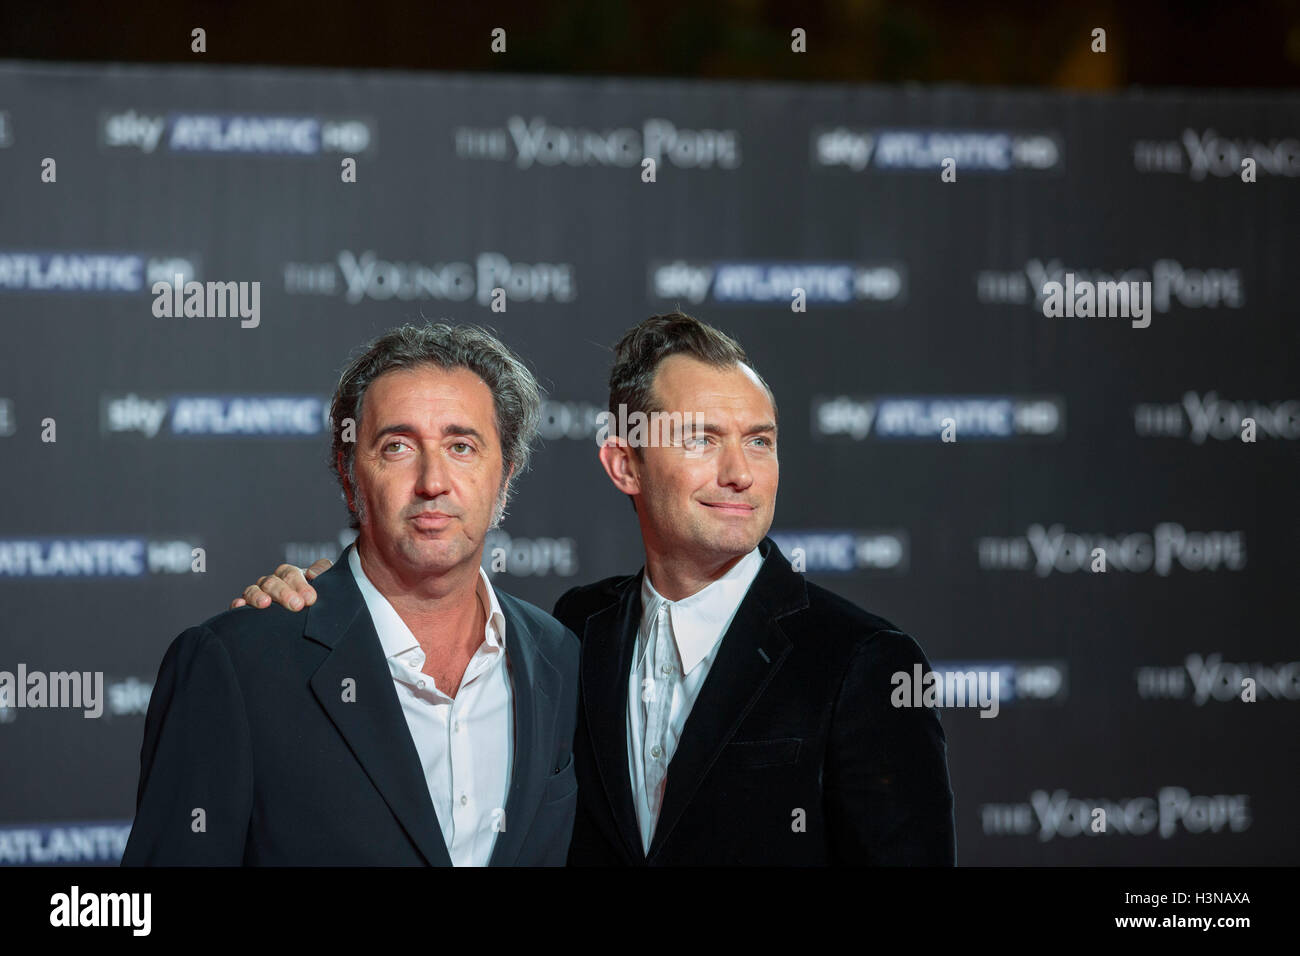 Premier in Rome for the new television series "The Young Pope" by Paolo Sorrentino, Rome, Italy. 9th October 2016 Stock Photo